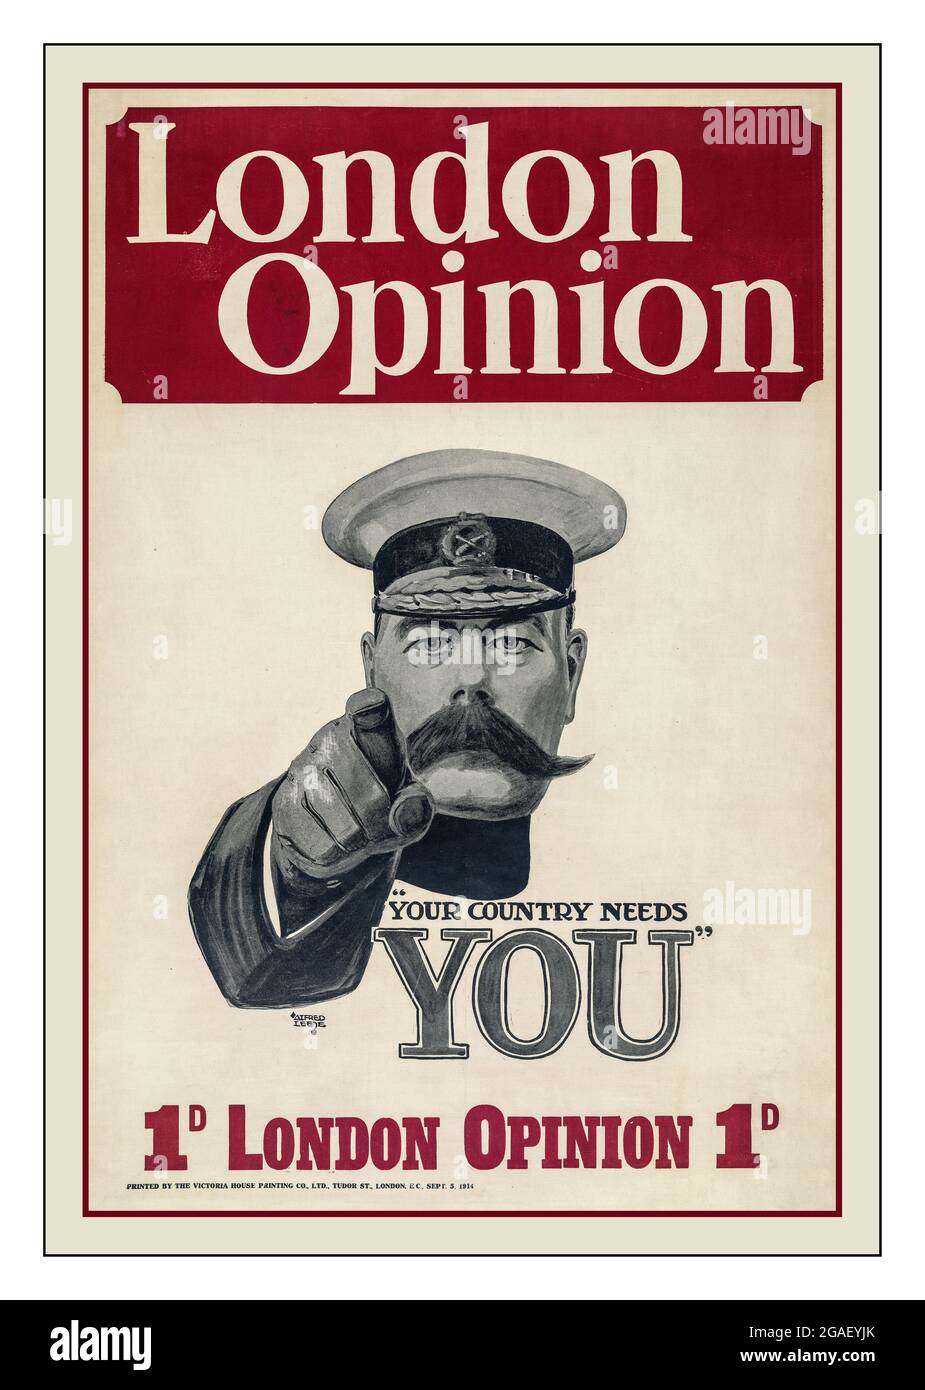 'Your country needs you'  World War 1 Recruitment Recruiting Poster Lord Kitchener  London opinion 'Your country needs you' / Alfred Leete. Creator(s): Leete, Alfred, 1882-1933, artist Date Created/Published: London : Printed by the Victoria House Printing Co., Ltd., 1914. (poster) : screenprint with halftone, color ;   Front view of Lord Kitchener with his arm and fingers pointing at the viewer. Kitchener, Horatio Herbert Kitchener,--Earl,--1850-1916--Military service. World War, 1914-1918--Recruiting & enlistment--Great Britain. Stock Photo